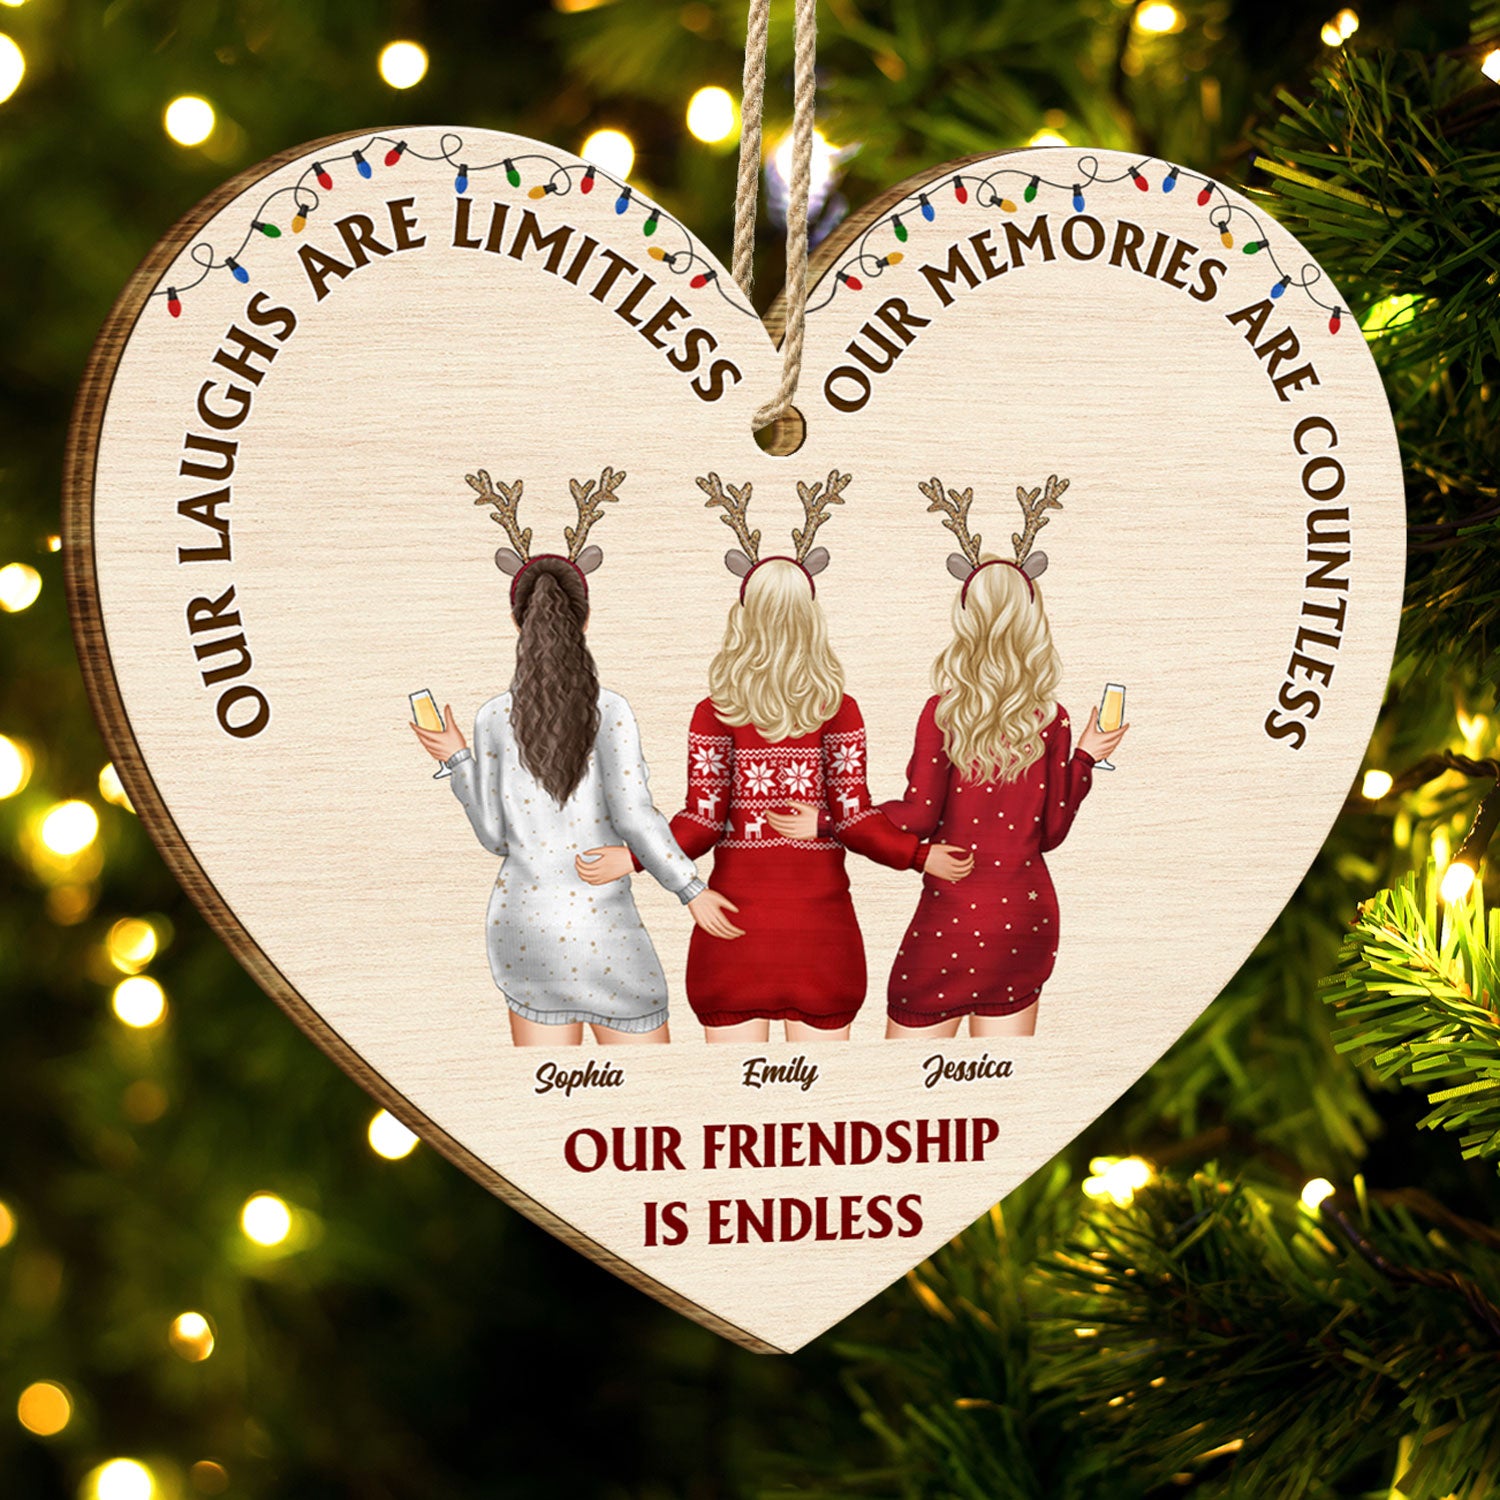 Our Friendship Is Endless - Christmas Gift For Besties, BFF Best Friends, Sisters - Personalized Custom Shaped Wooden Ornament